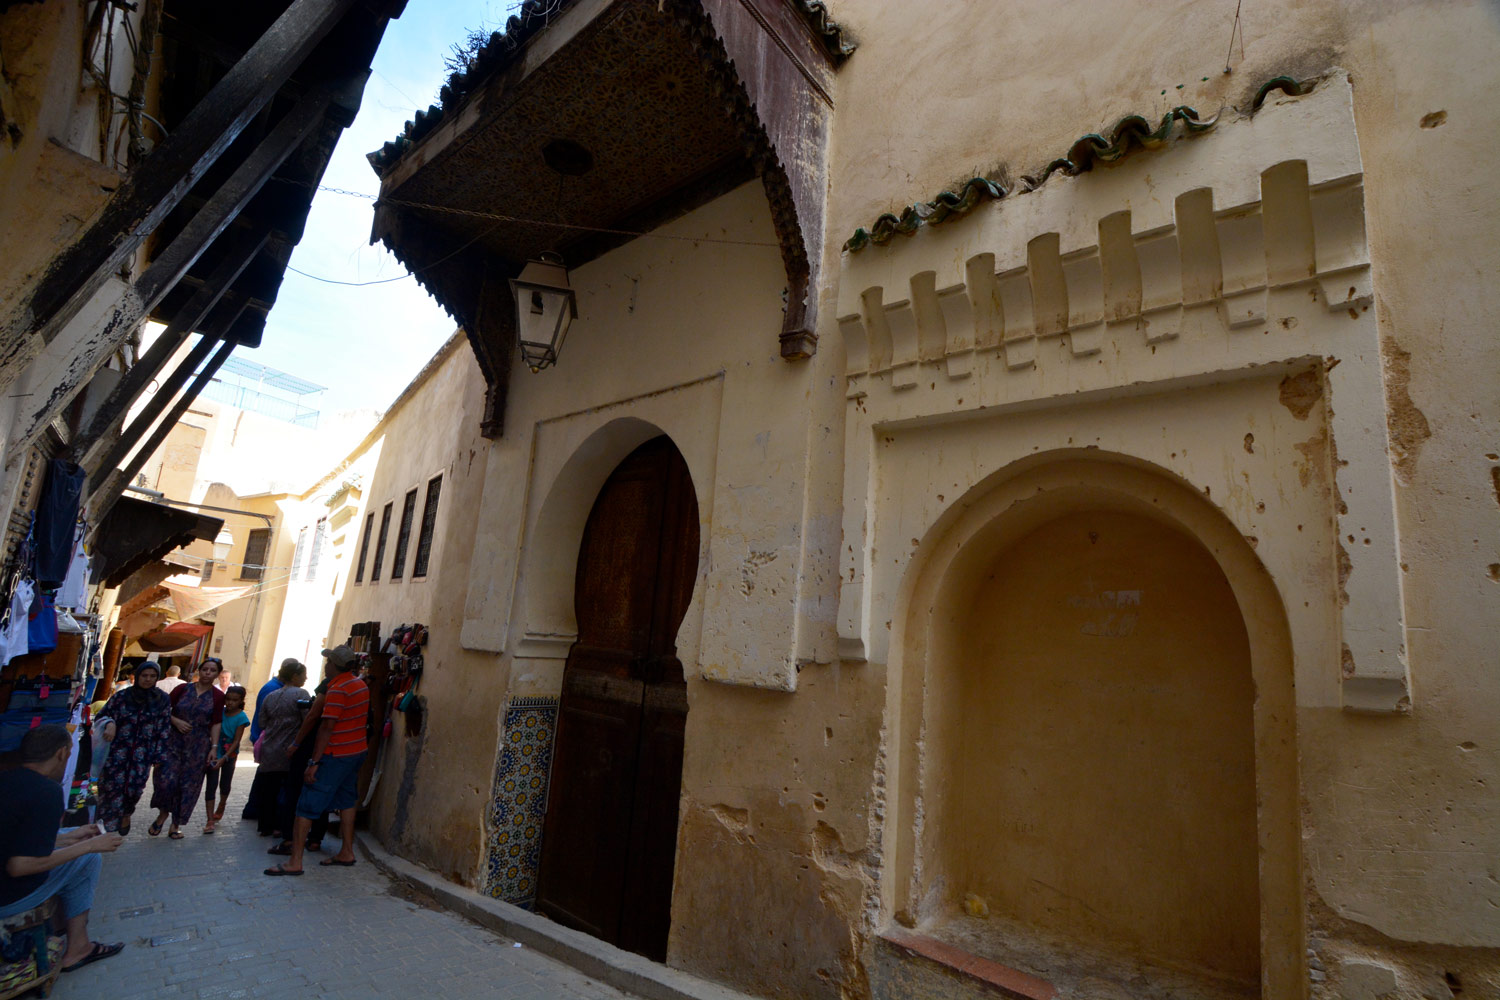 Exterior of a building  in the Medina of Fes.